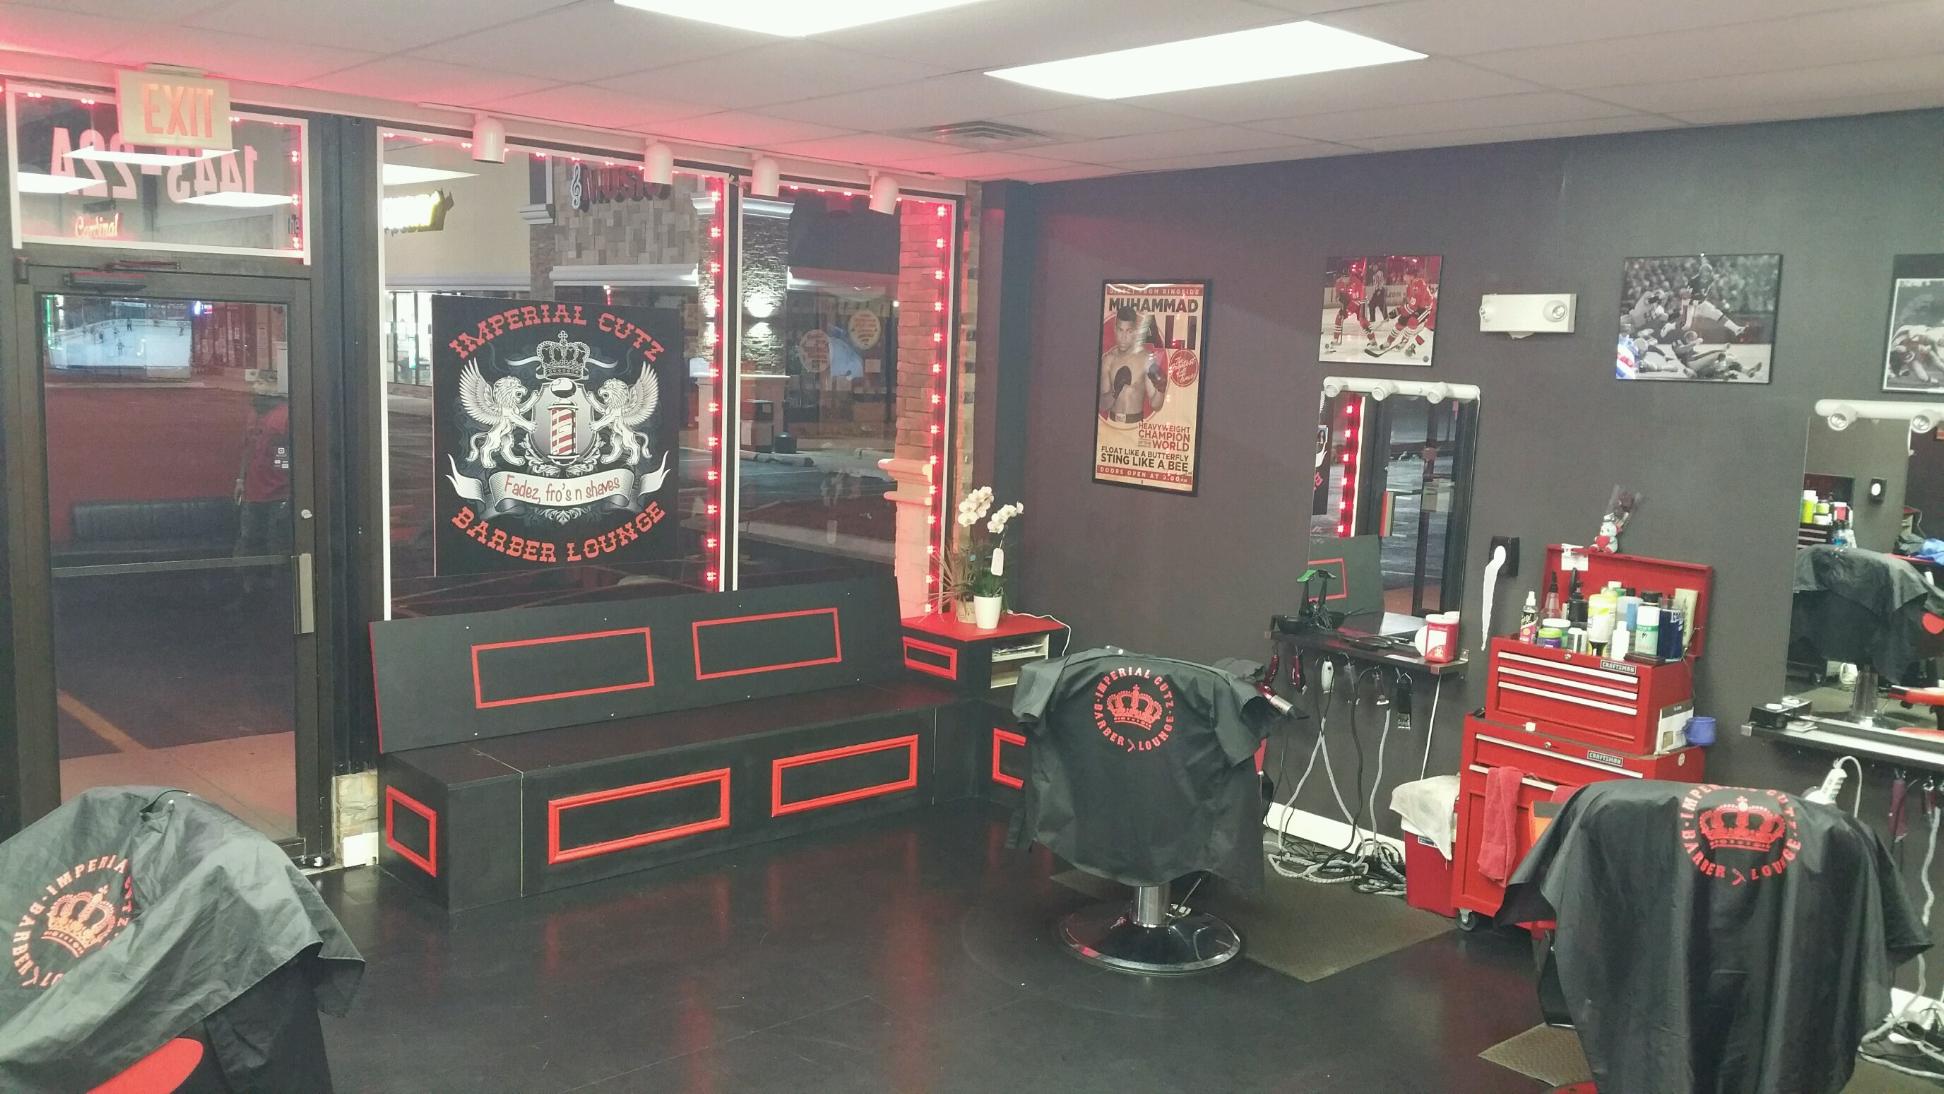 Imperial Cutz Barber Lounge